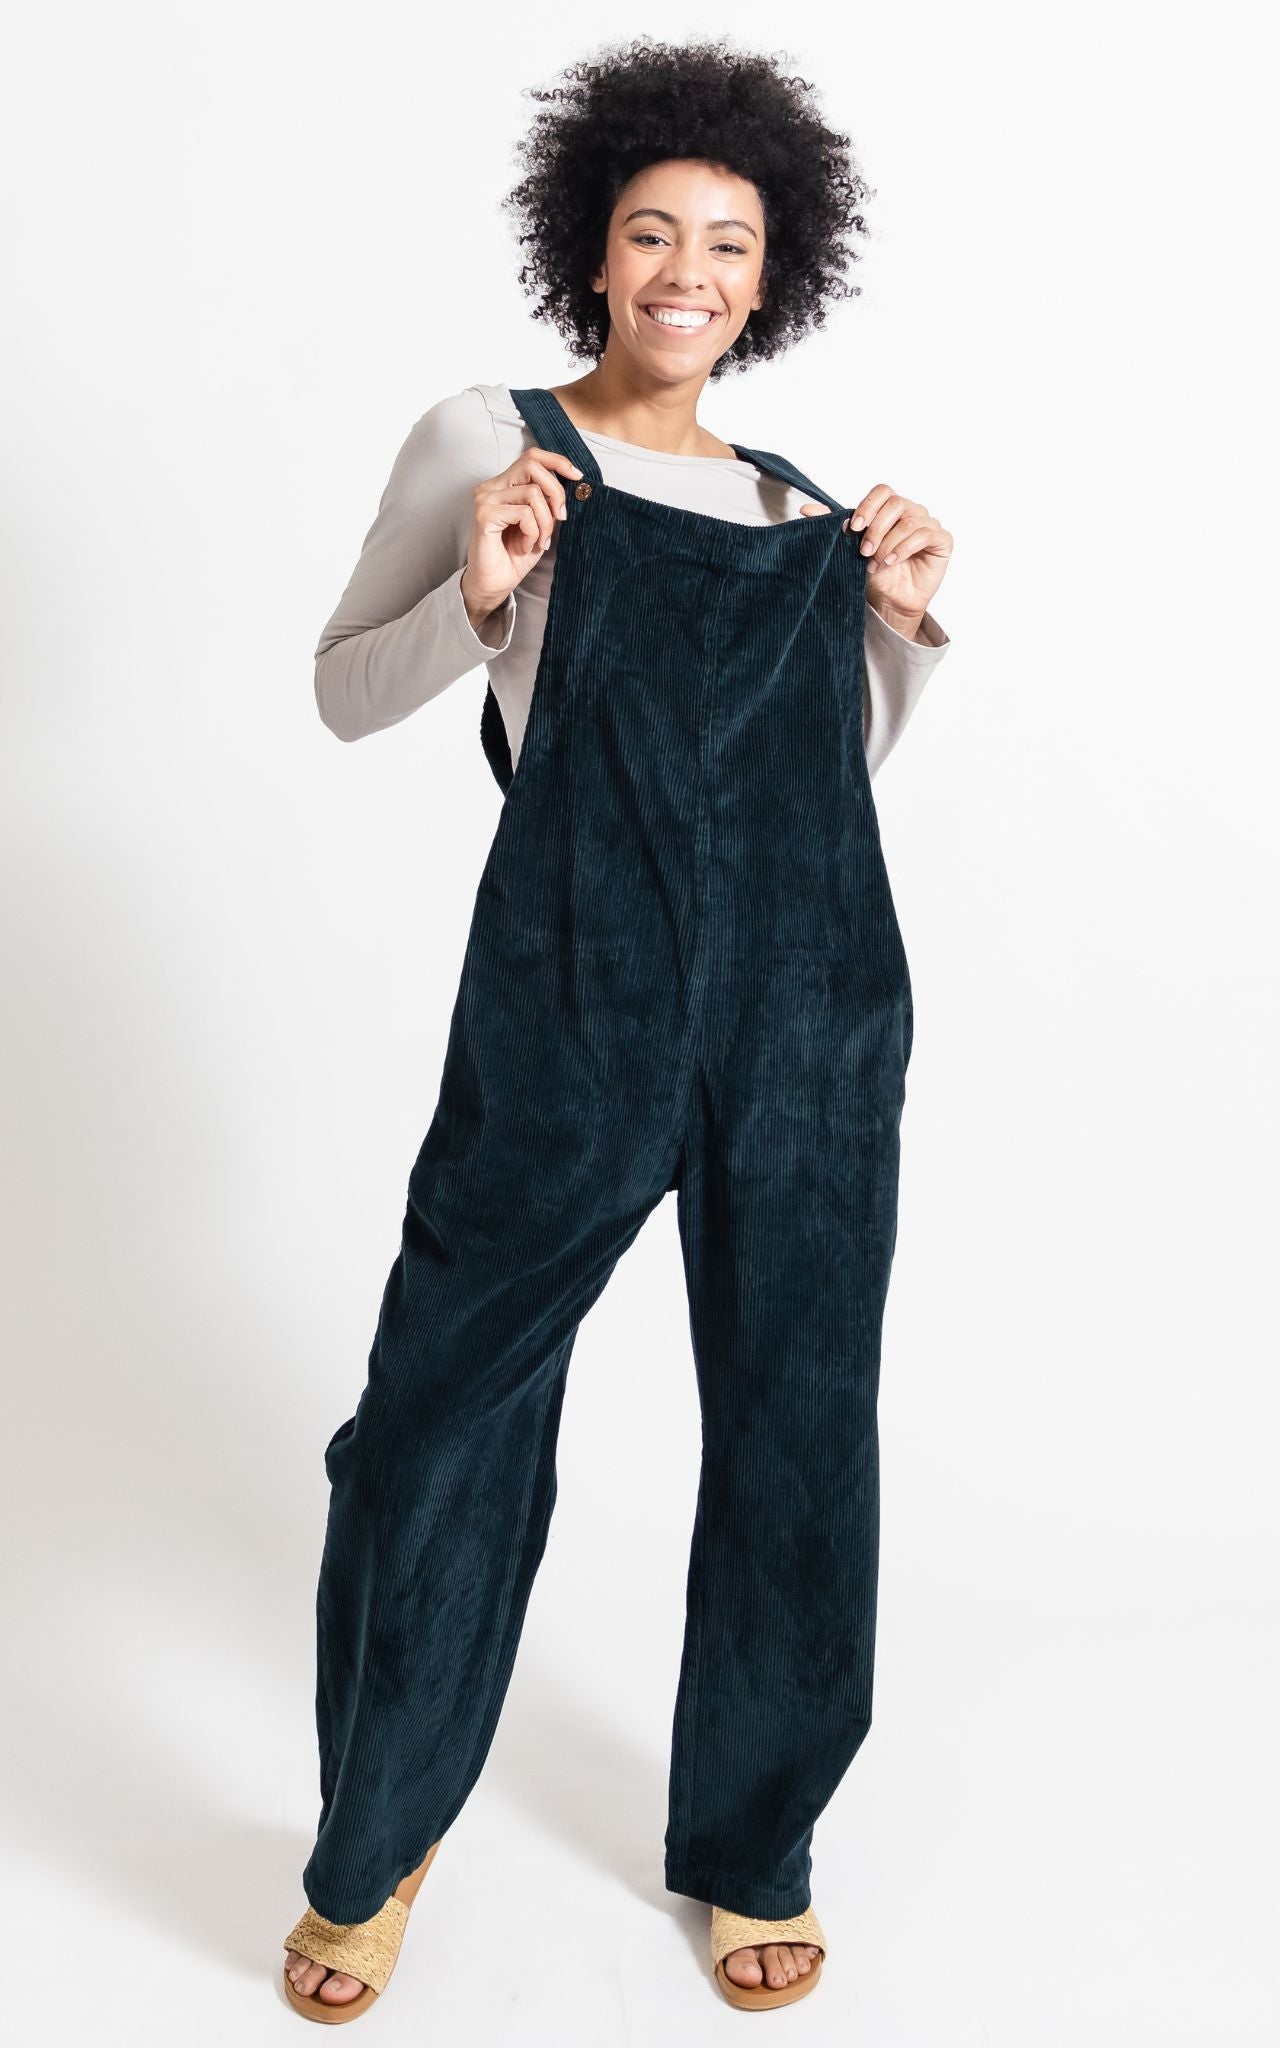 Surya Australia Corduroy Overalls Dungarees made in Nepal - Midnight Teal